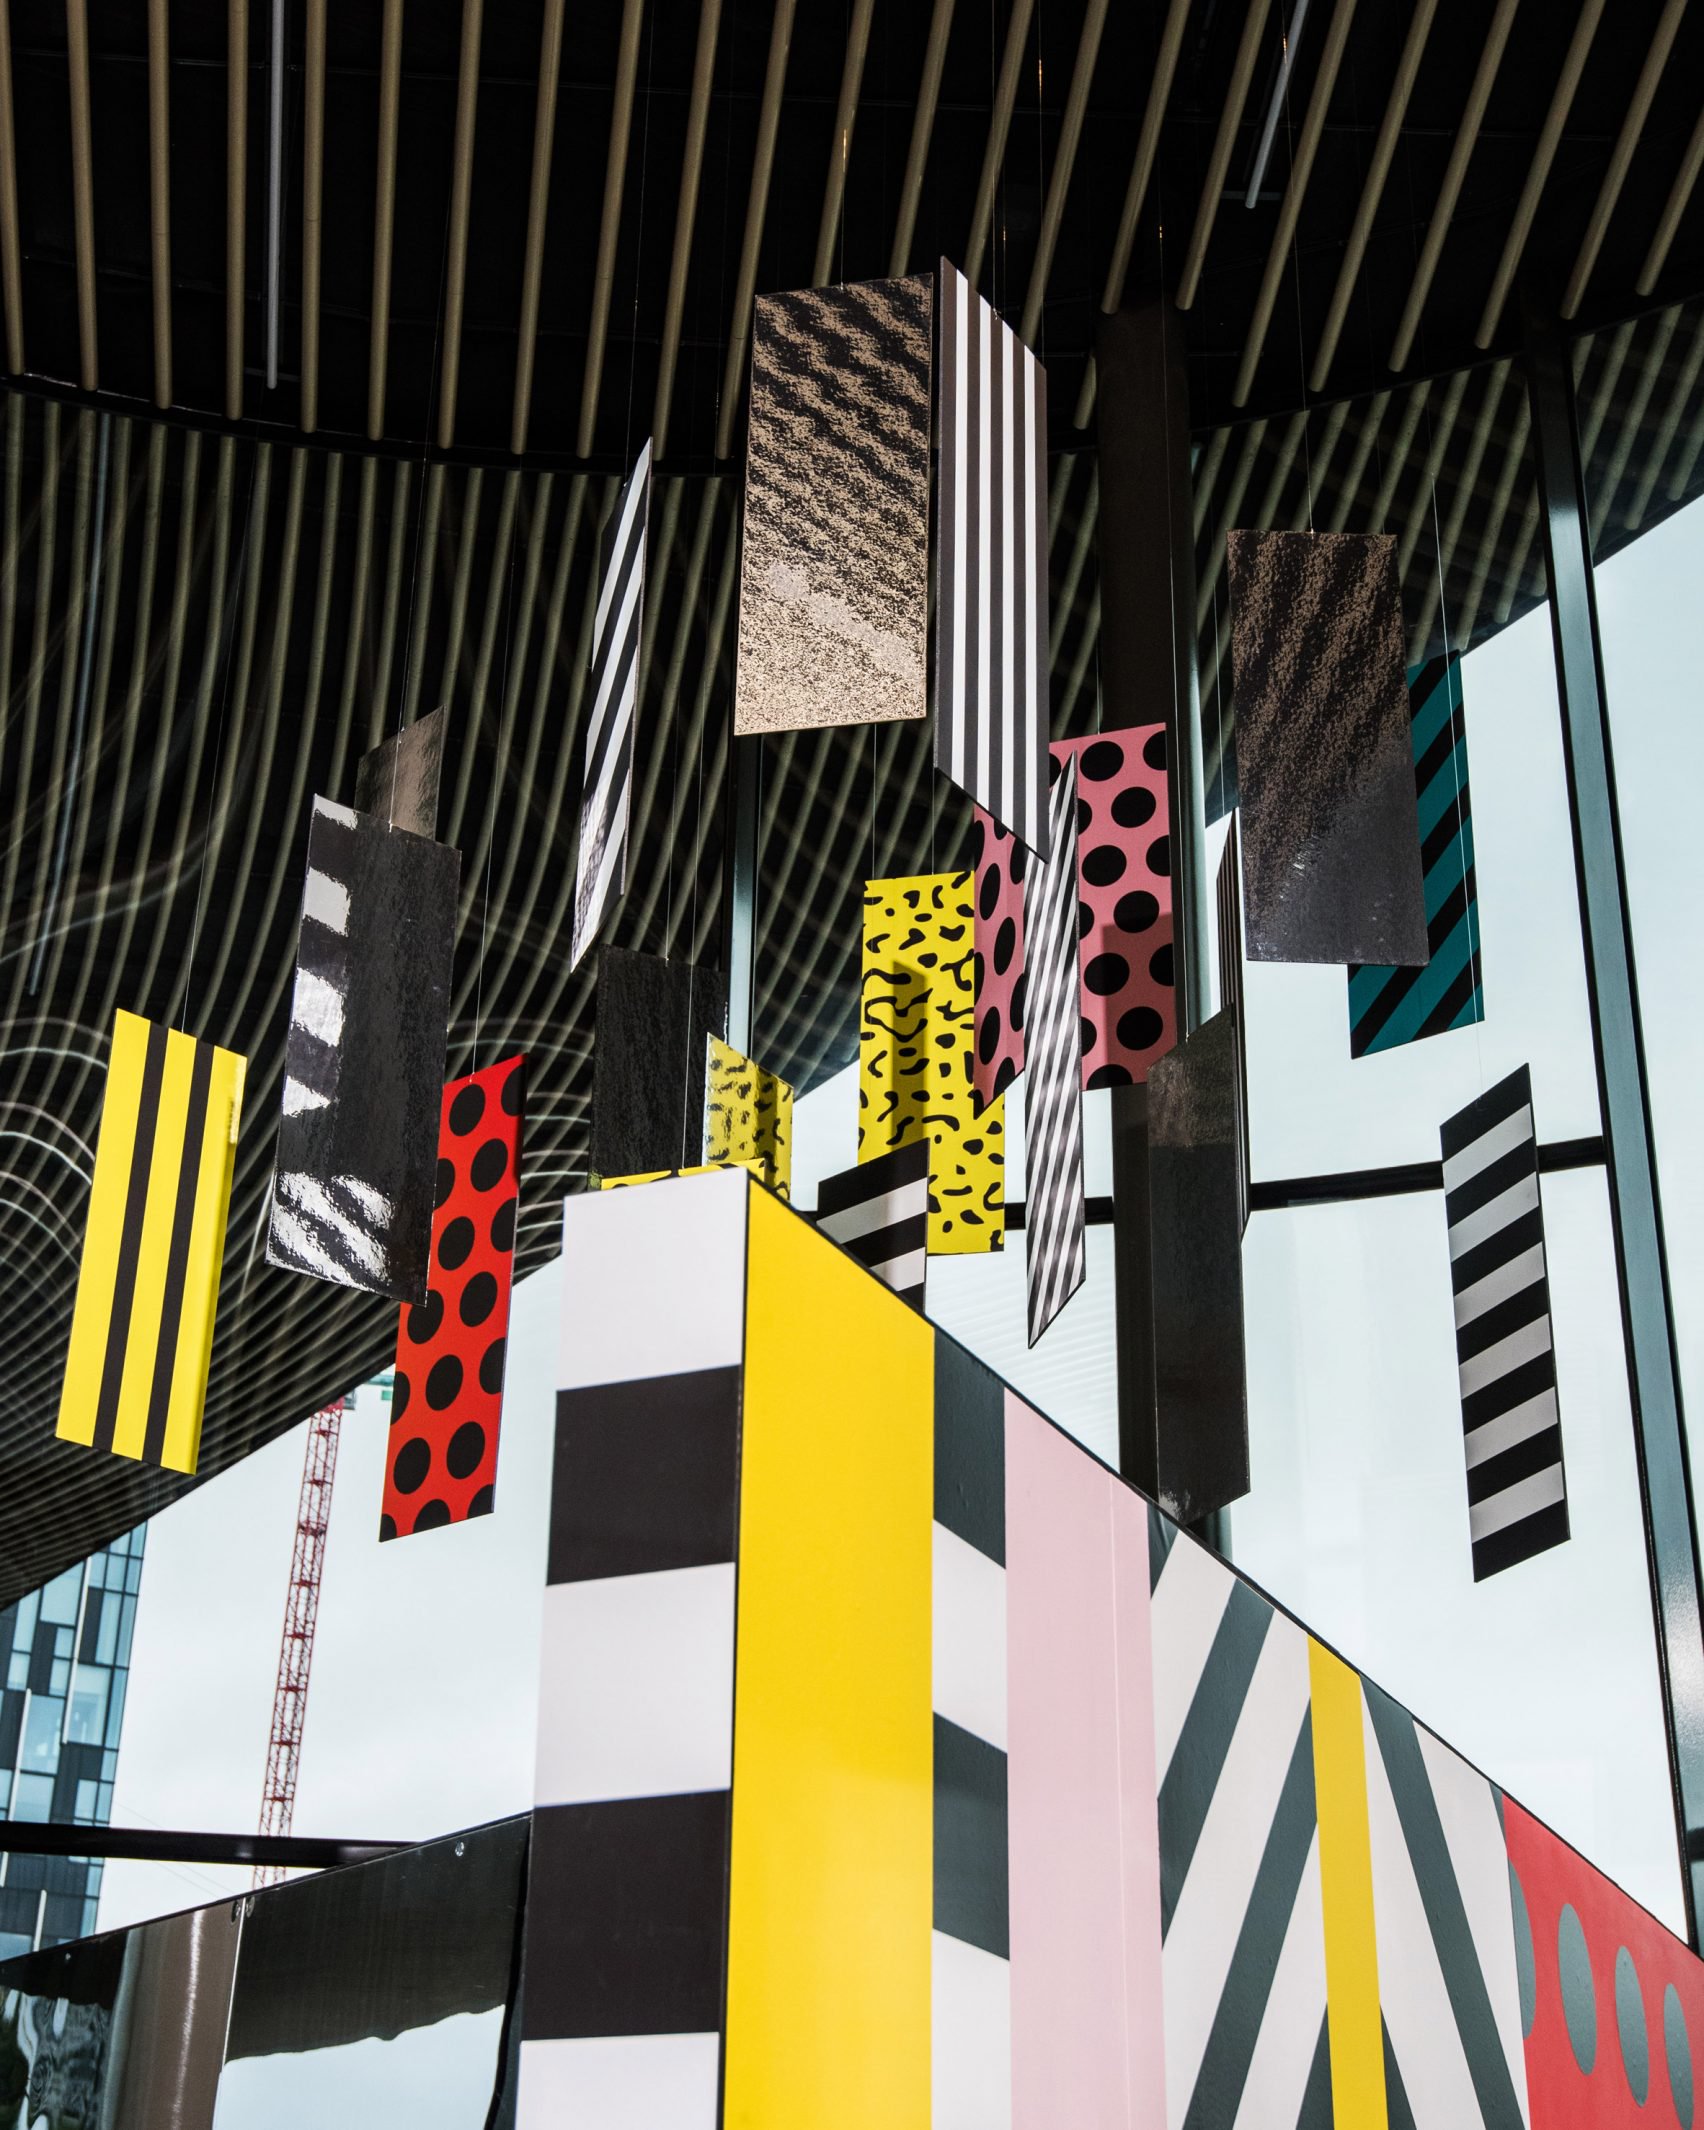 camille-walala-play-installation-now-gallery-london_dezeen_2364_col_8-1704x2130